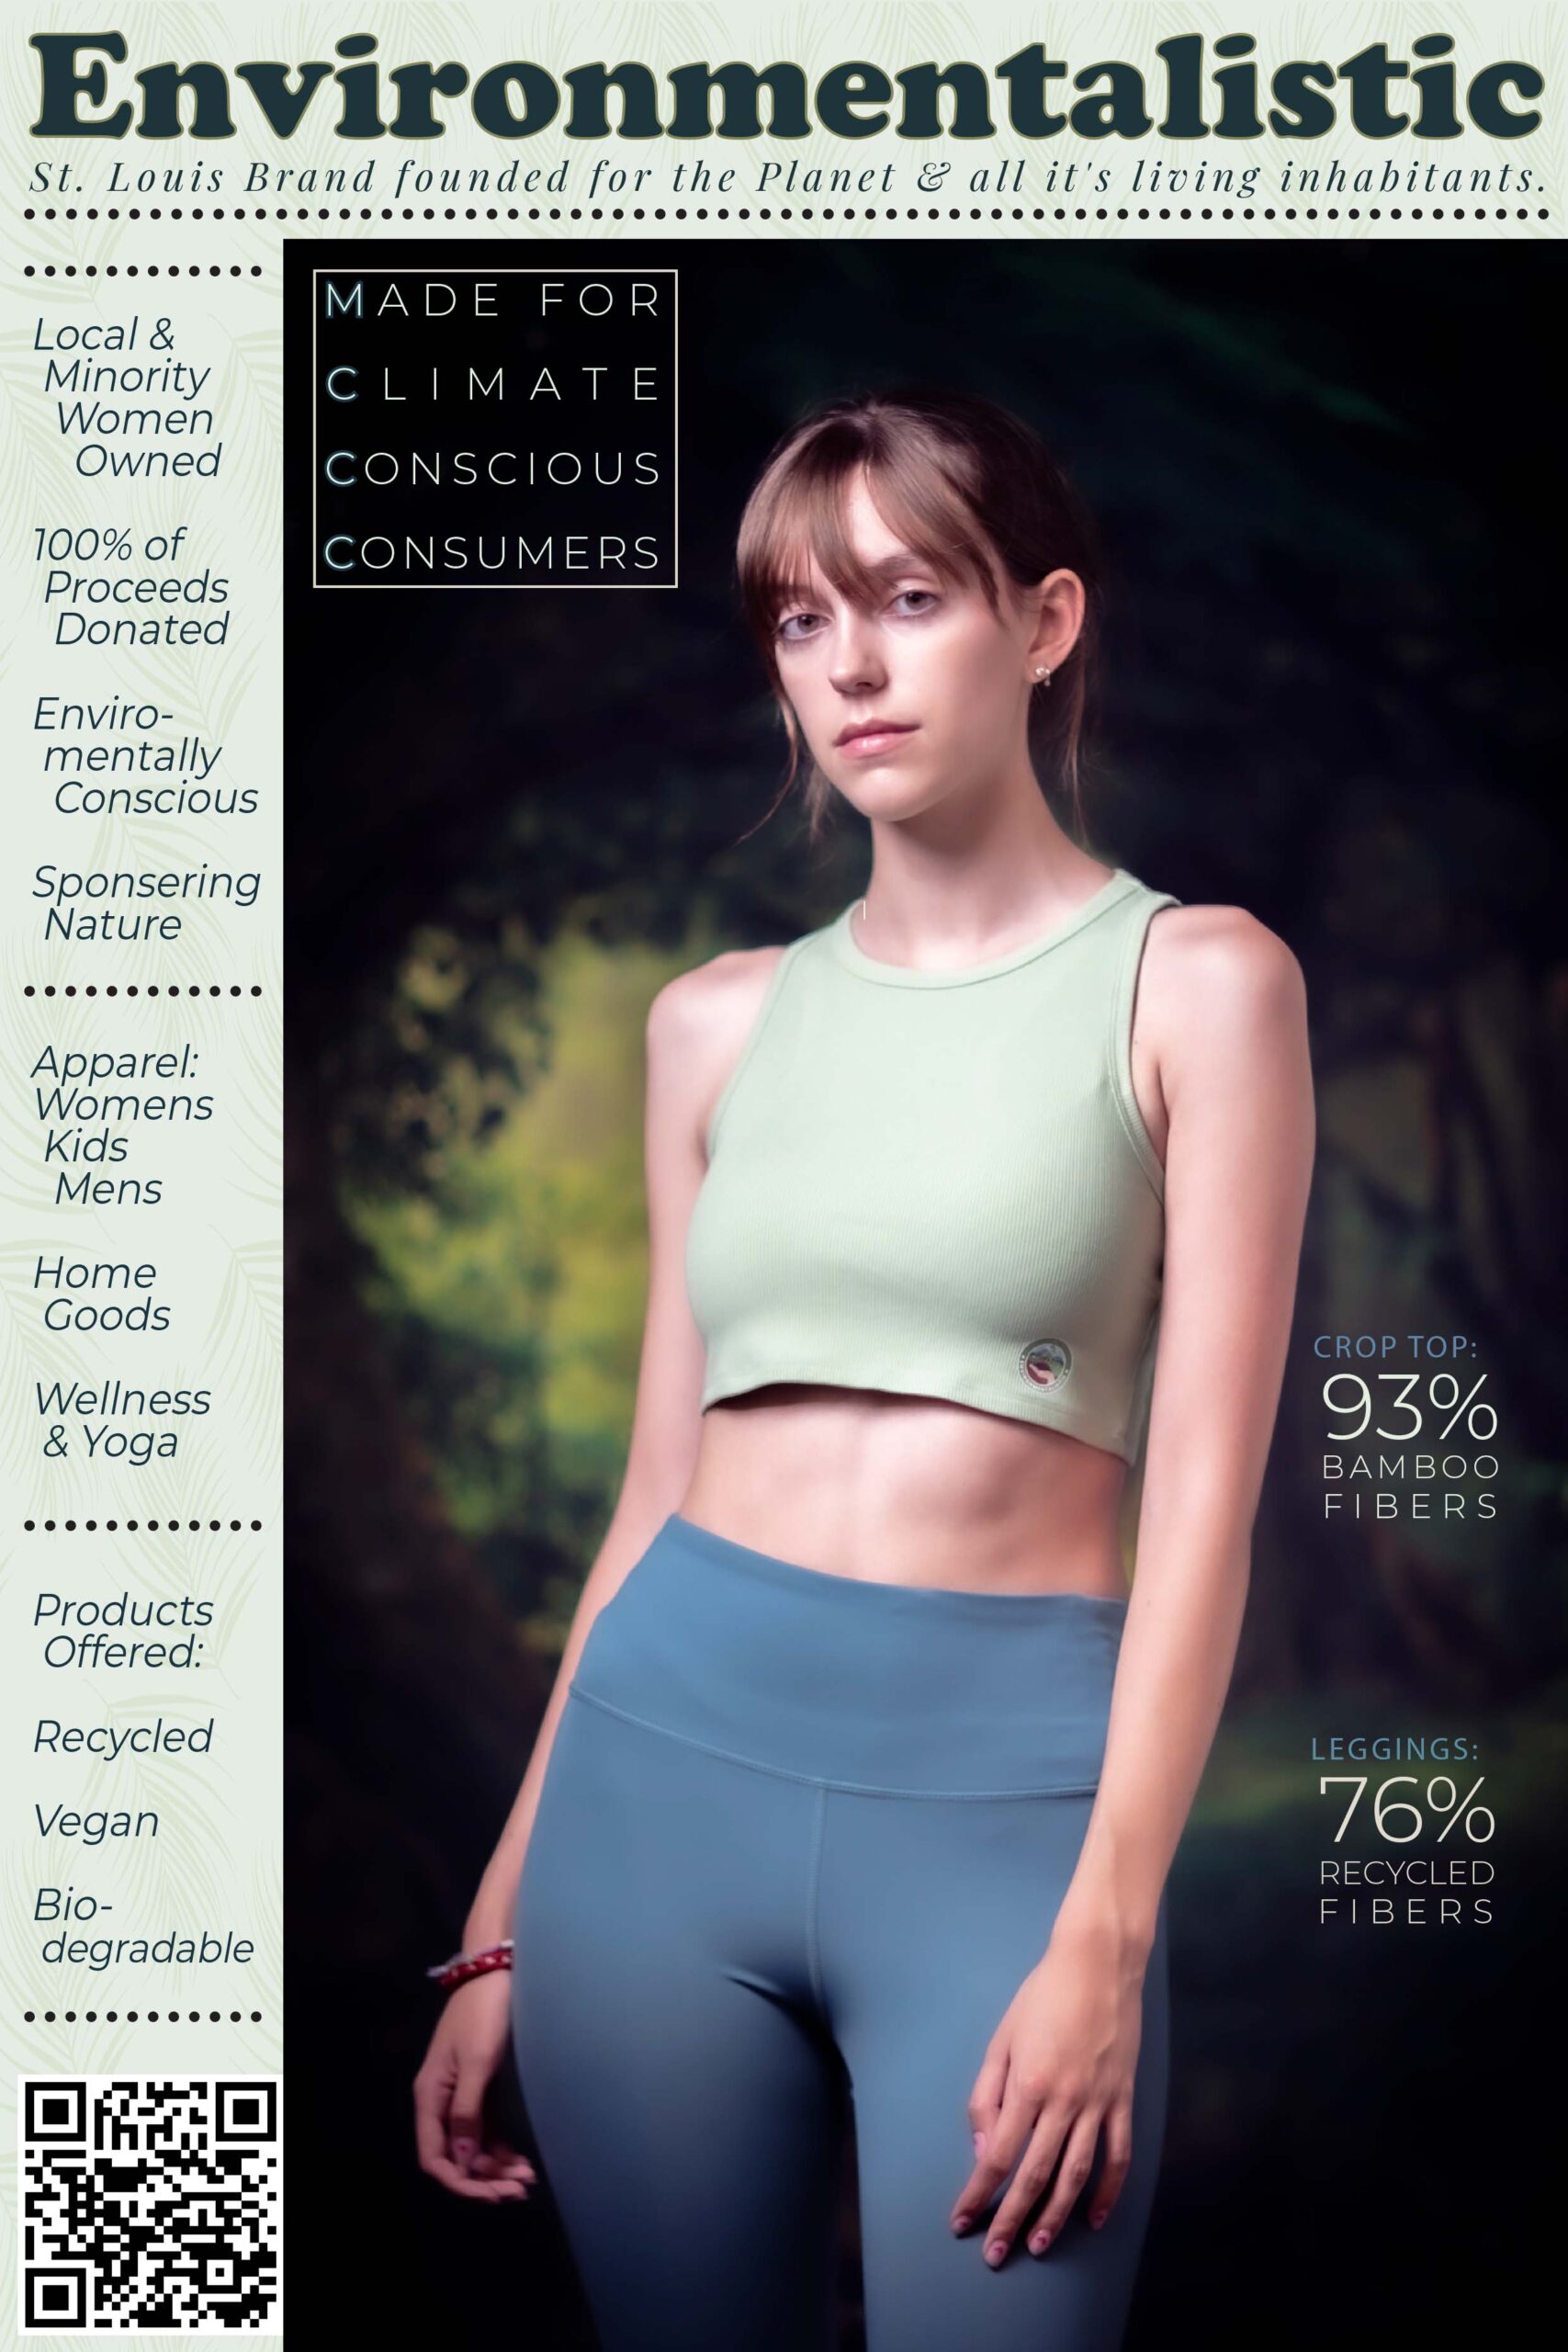 Environmentalistic ad poster promoting eco-friendly bamboo crop top and recycled plastic leggings